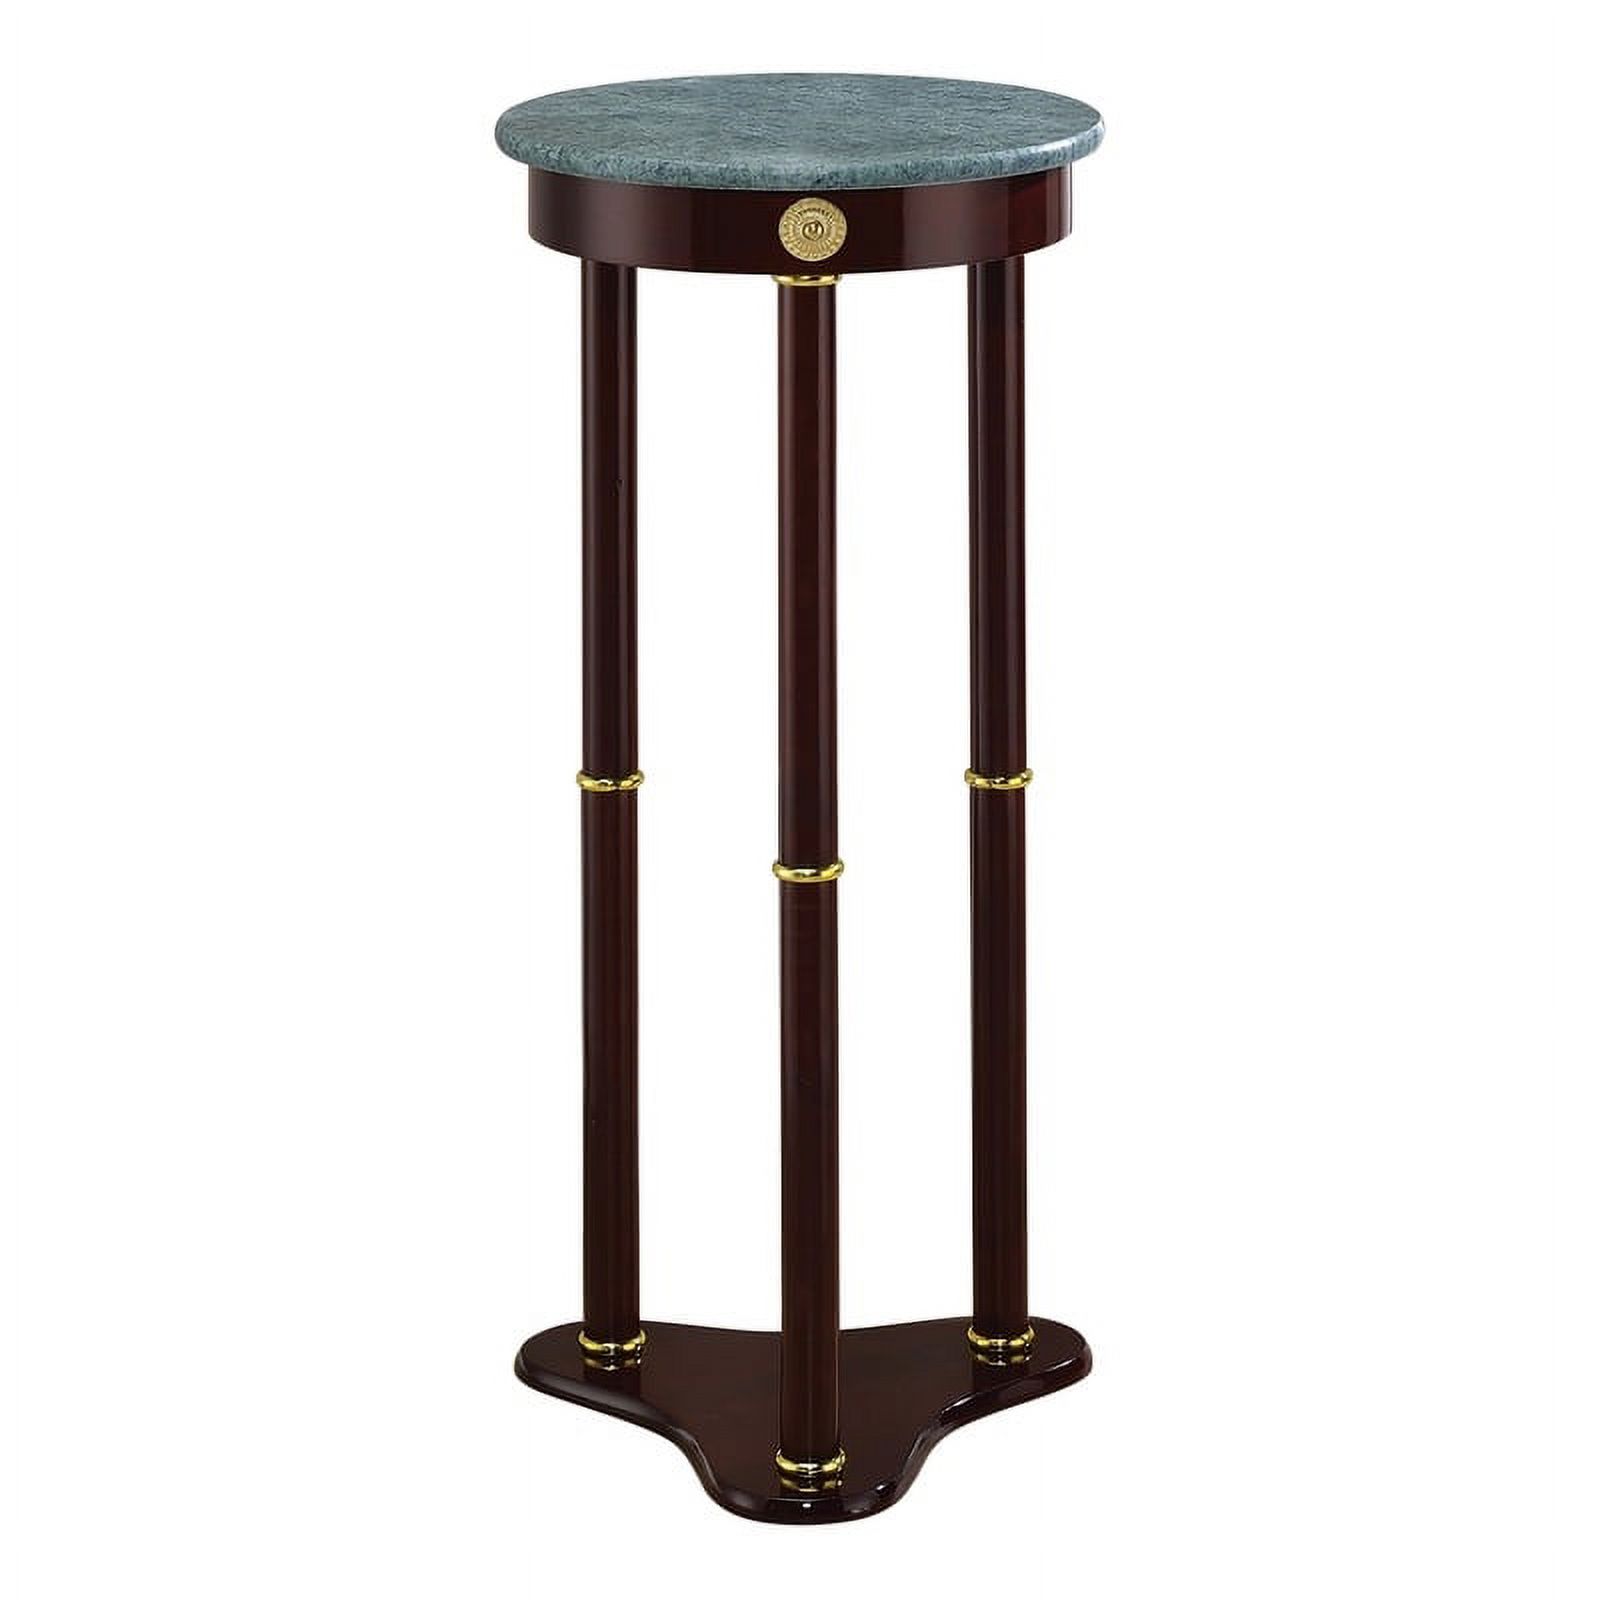 Bowery Hill Round Marble Top Plant Stand in Merlot and Green - image 1 of 2